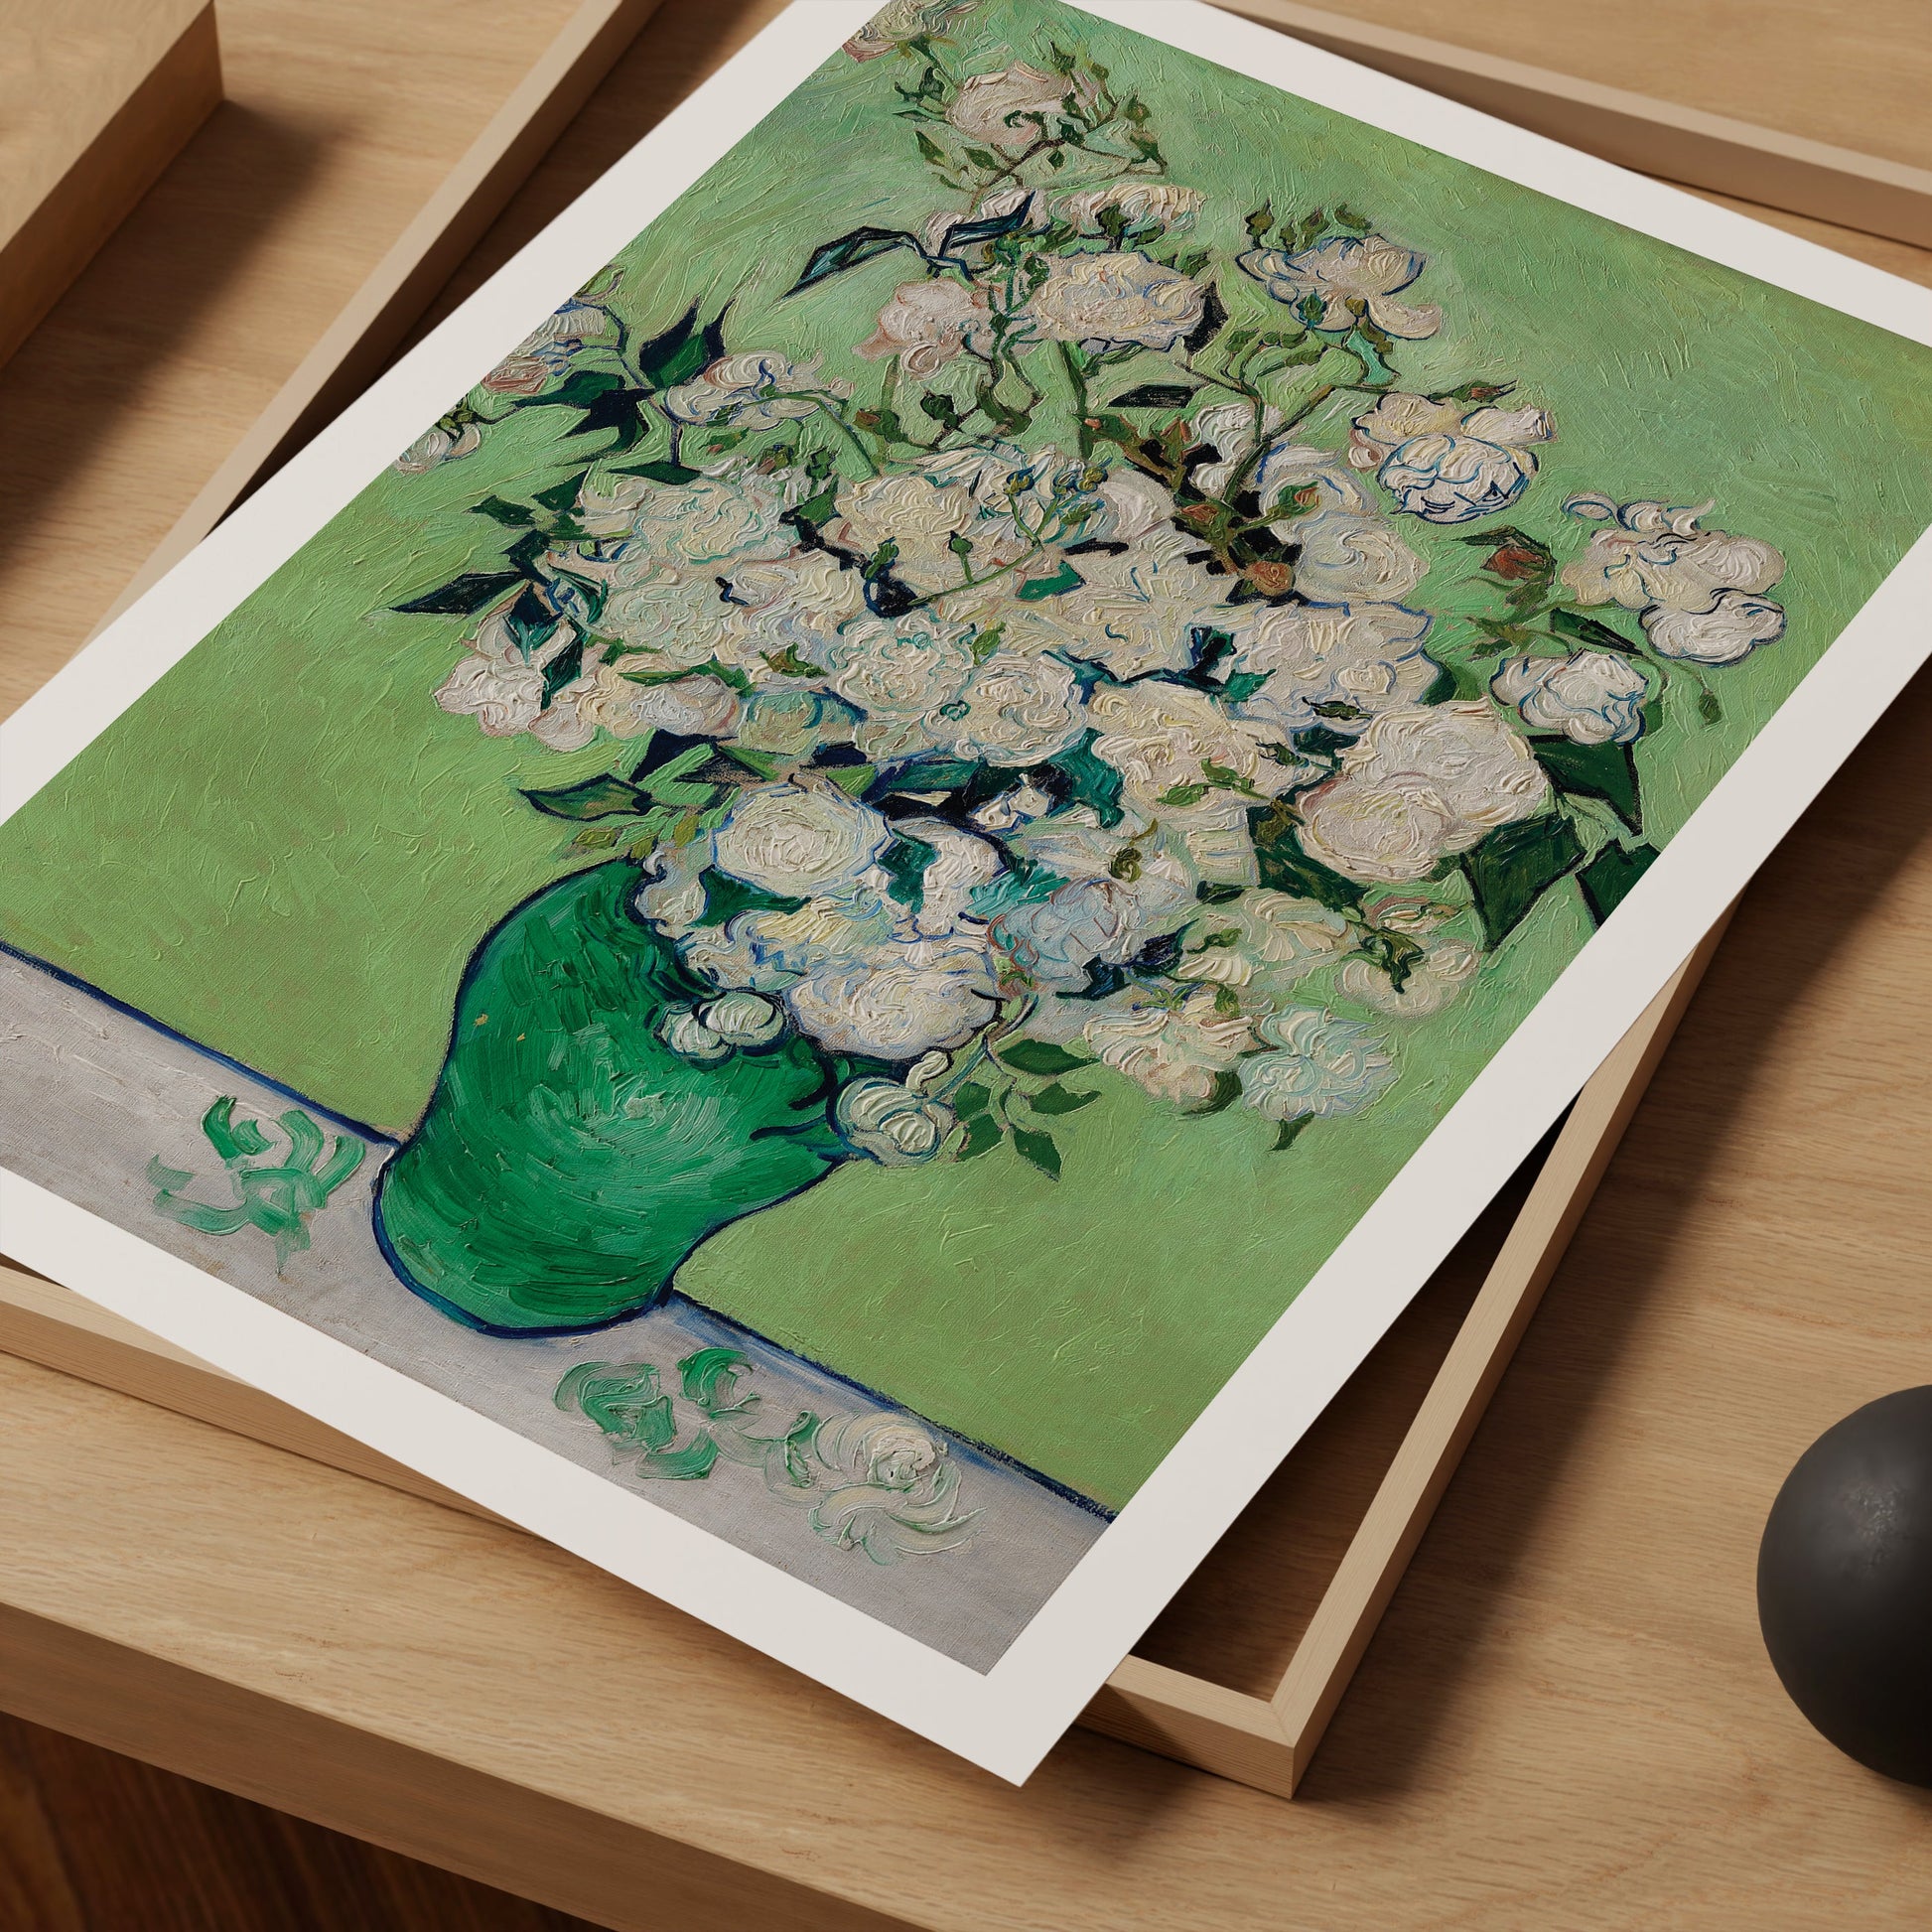 a painting of a green vase with white flowers